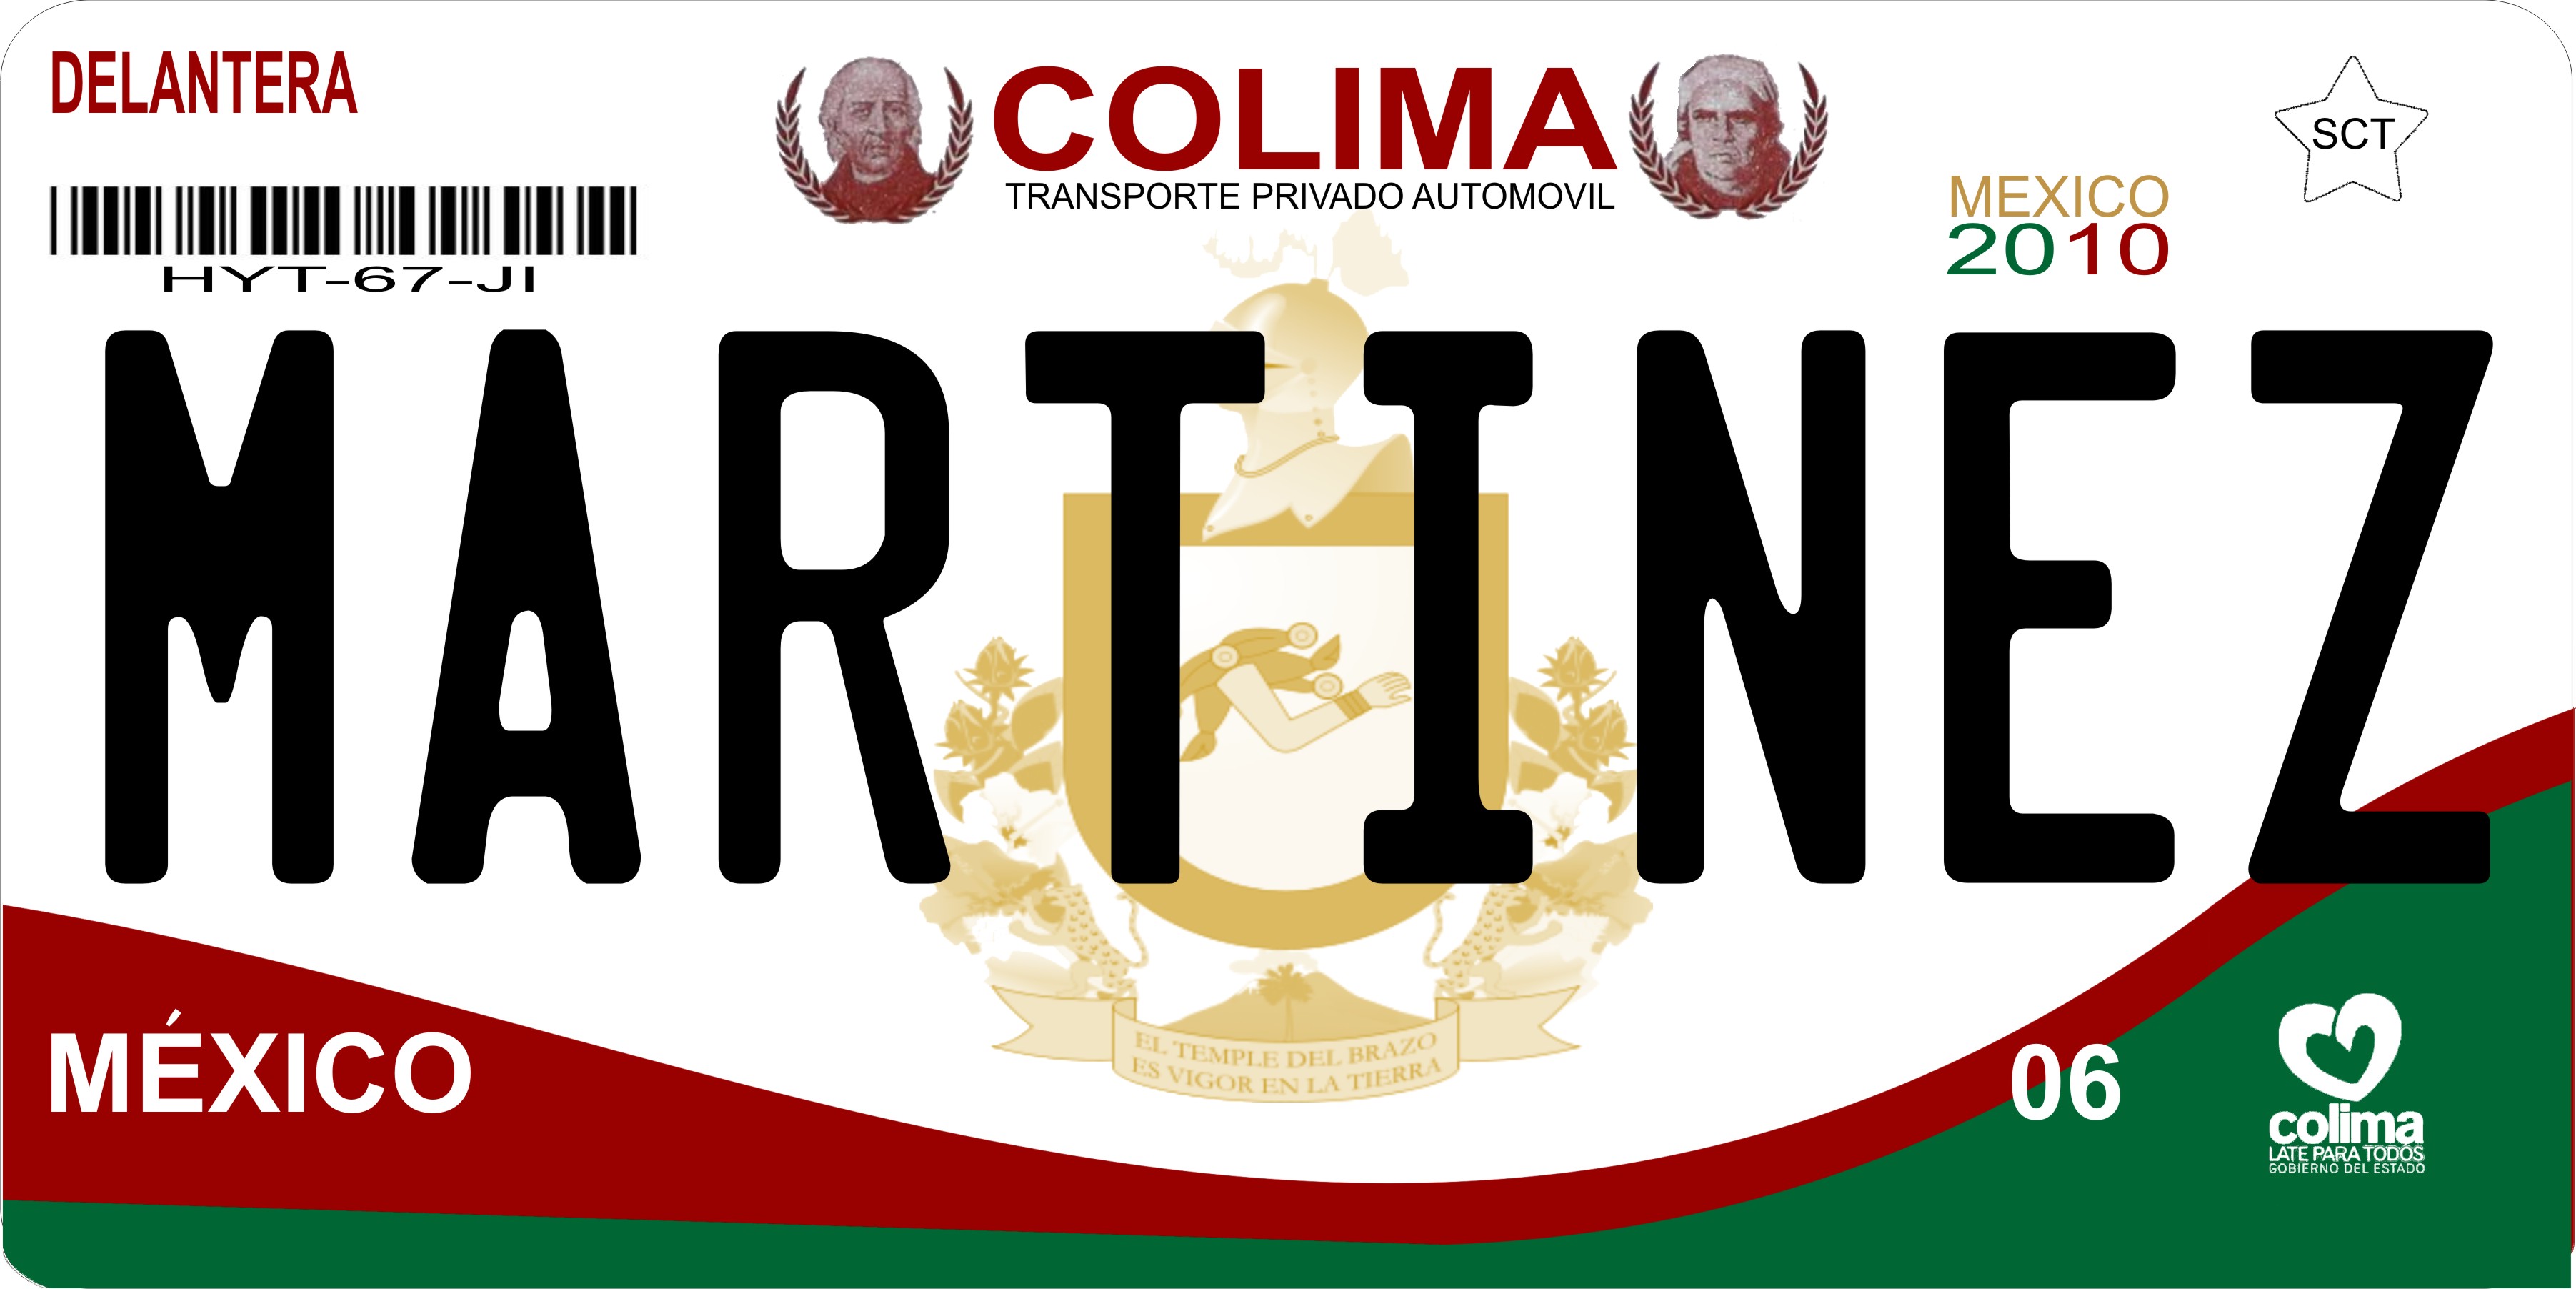 Mexico Colima Photo LICENSE PLATE Free Personalization on this PLATE